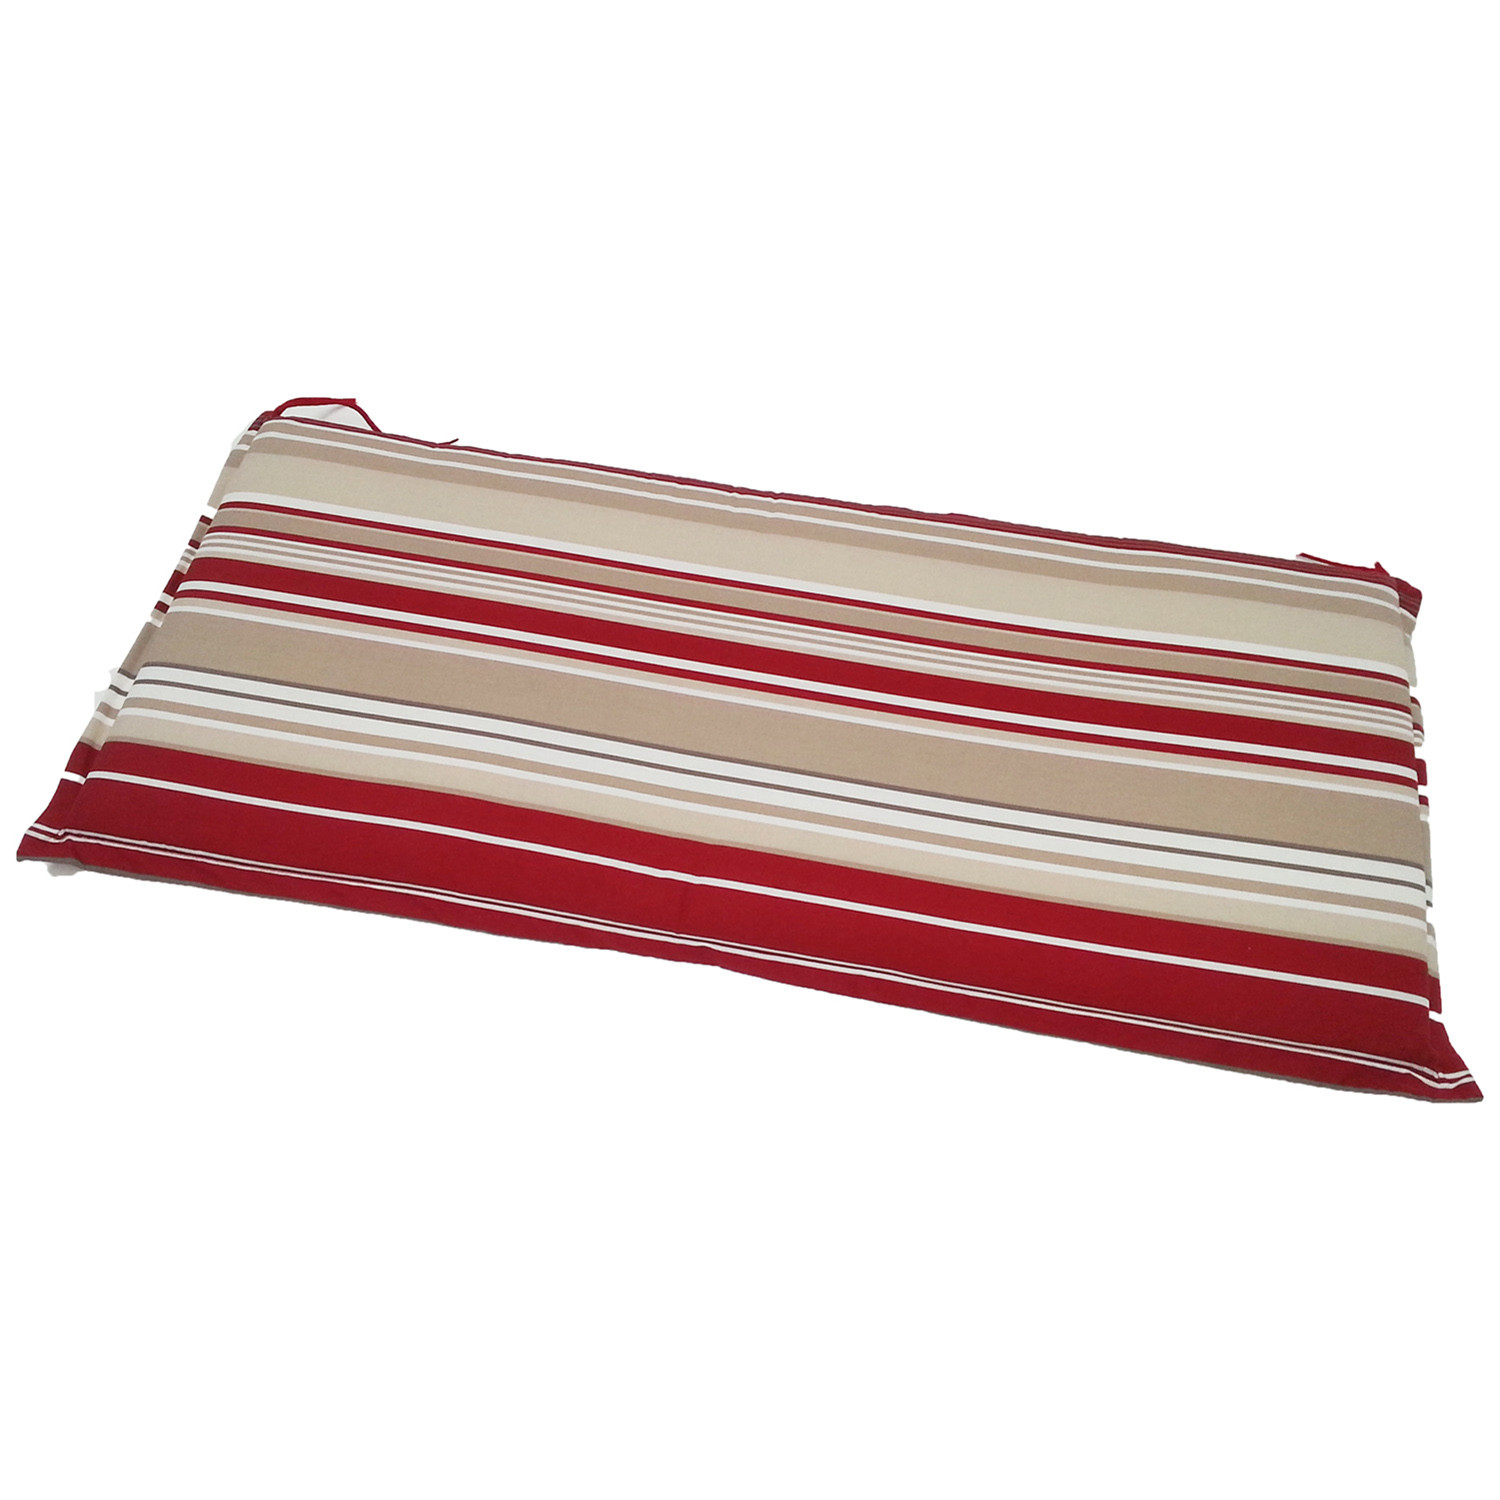 Striped Valance Cushion - 2 Seater Bench Image